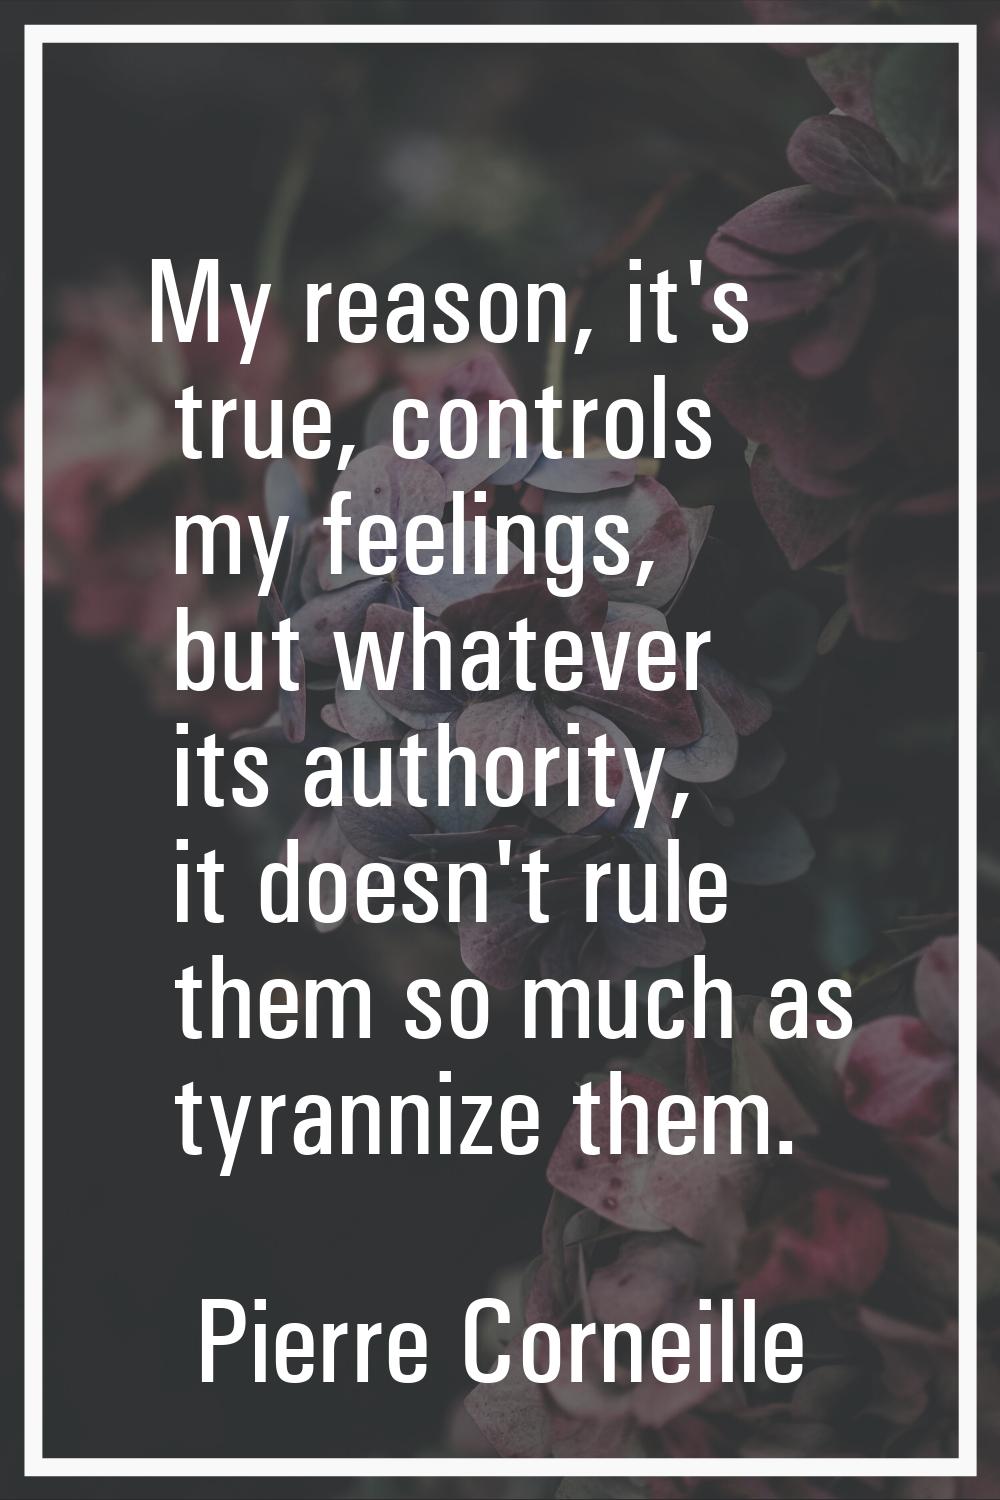 My reason, it's true, controls my feelings, but whatever its authority, it doesn't rule them so muc